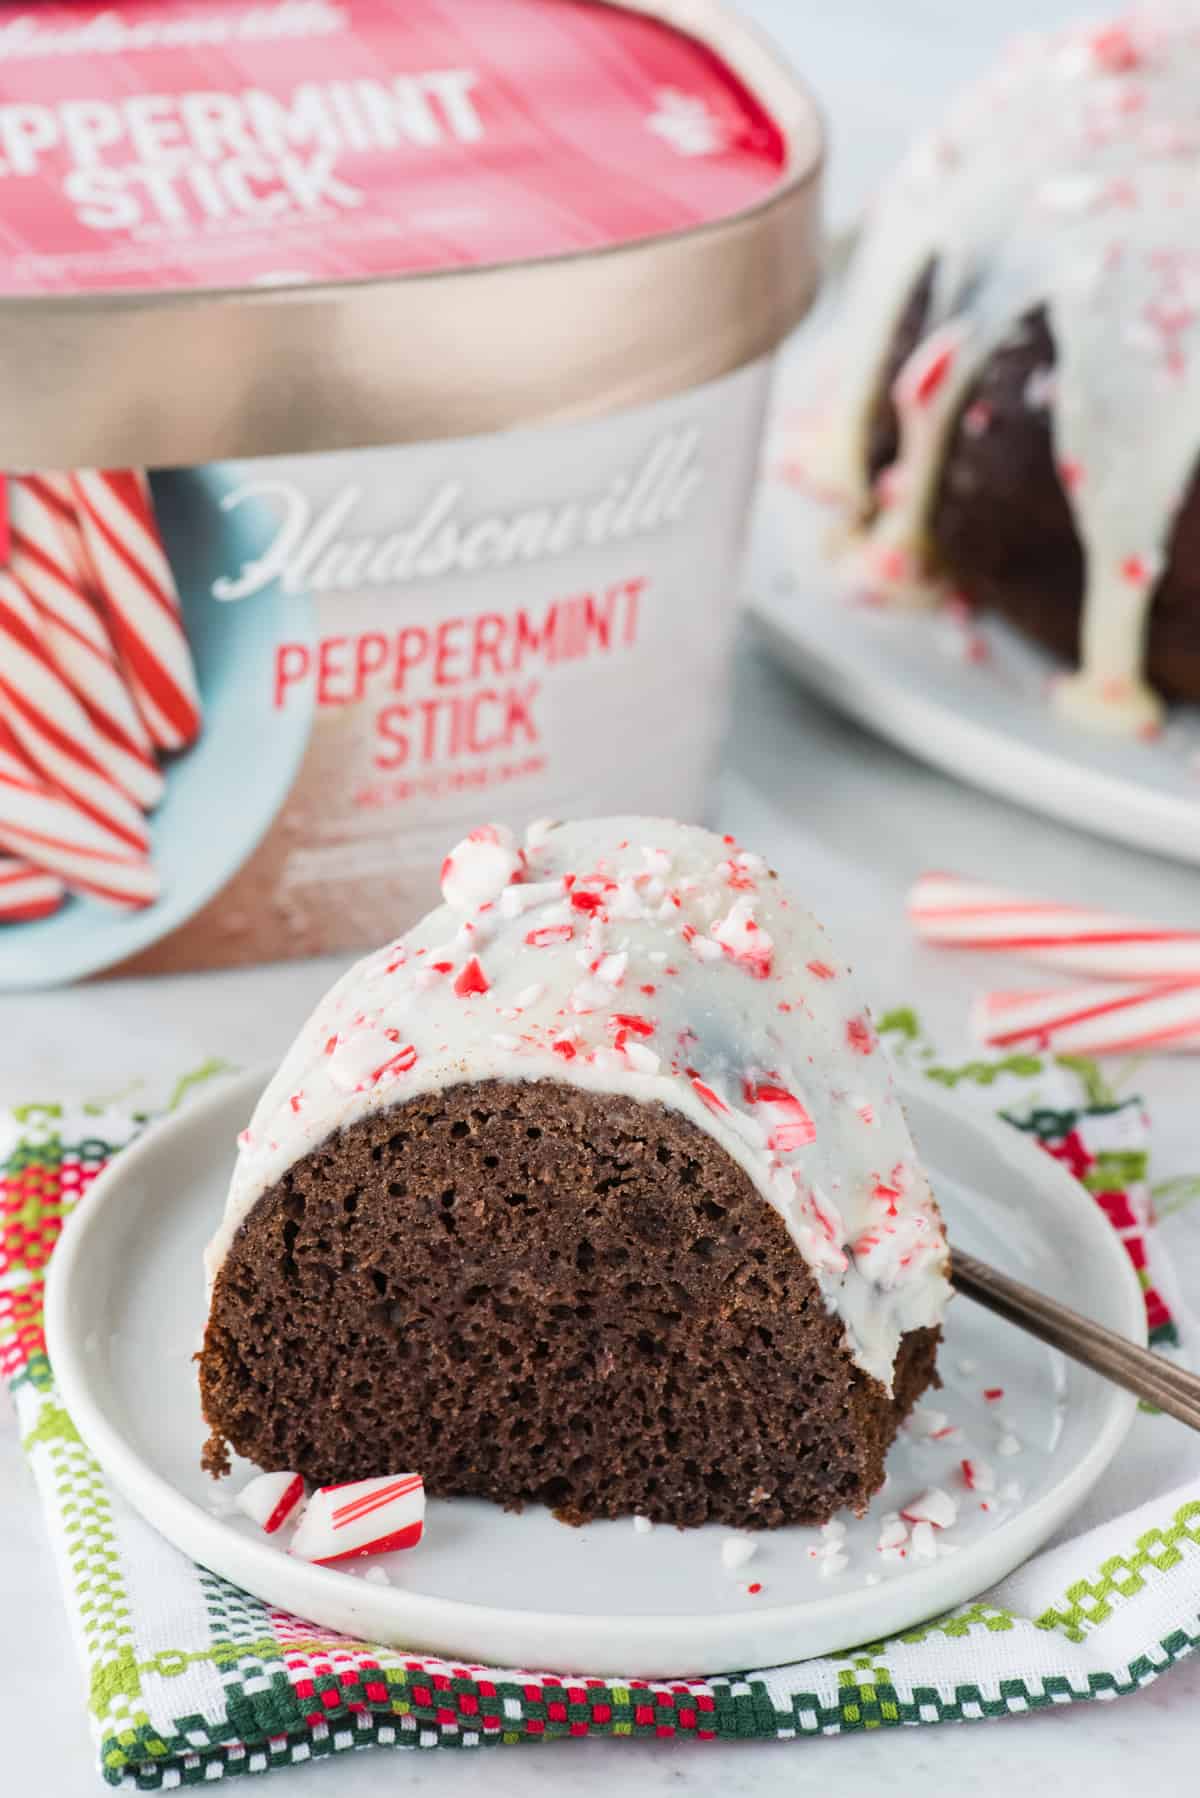 slice of chocolate peppermint bundt cake on white plate with ice cream container in the background